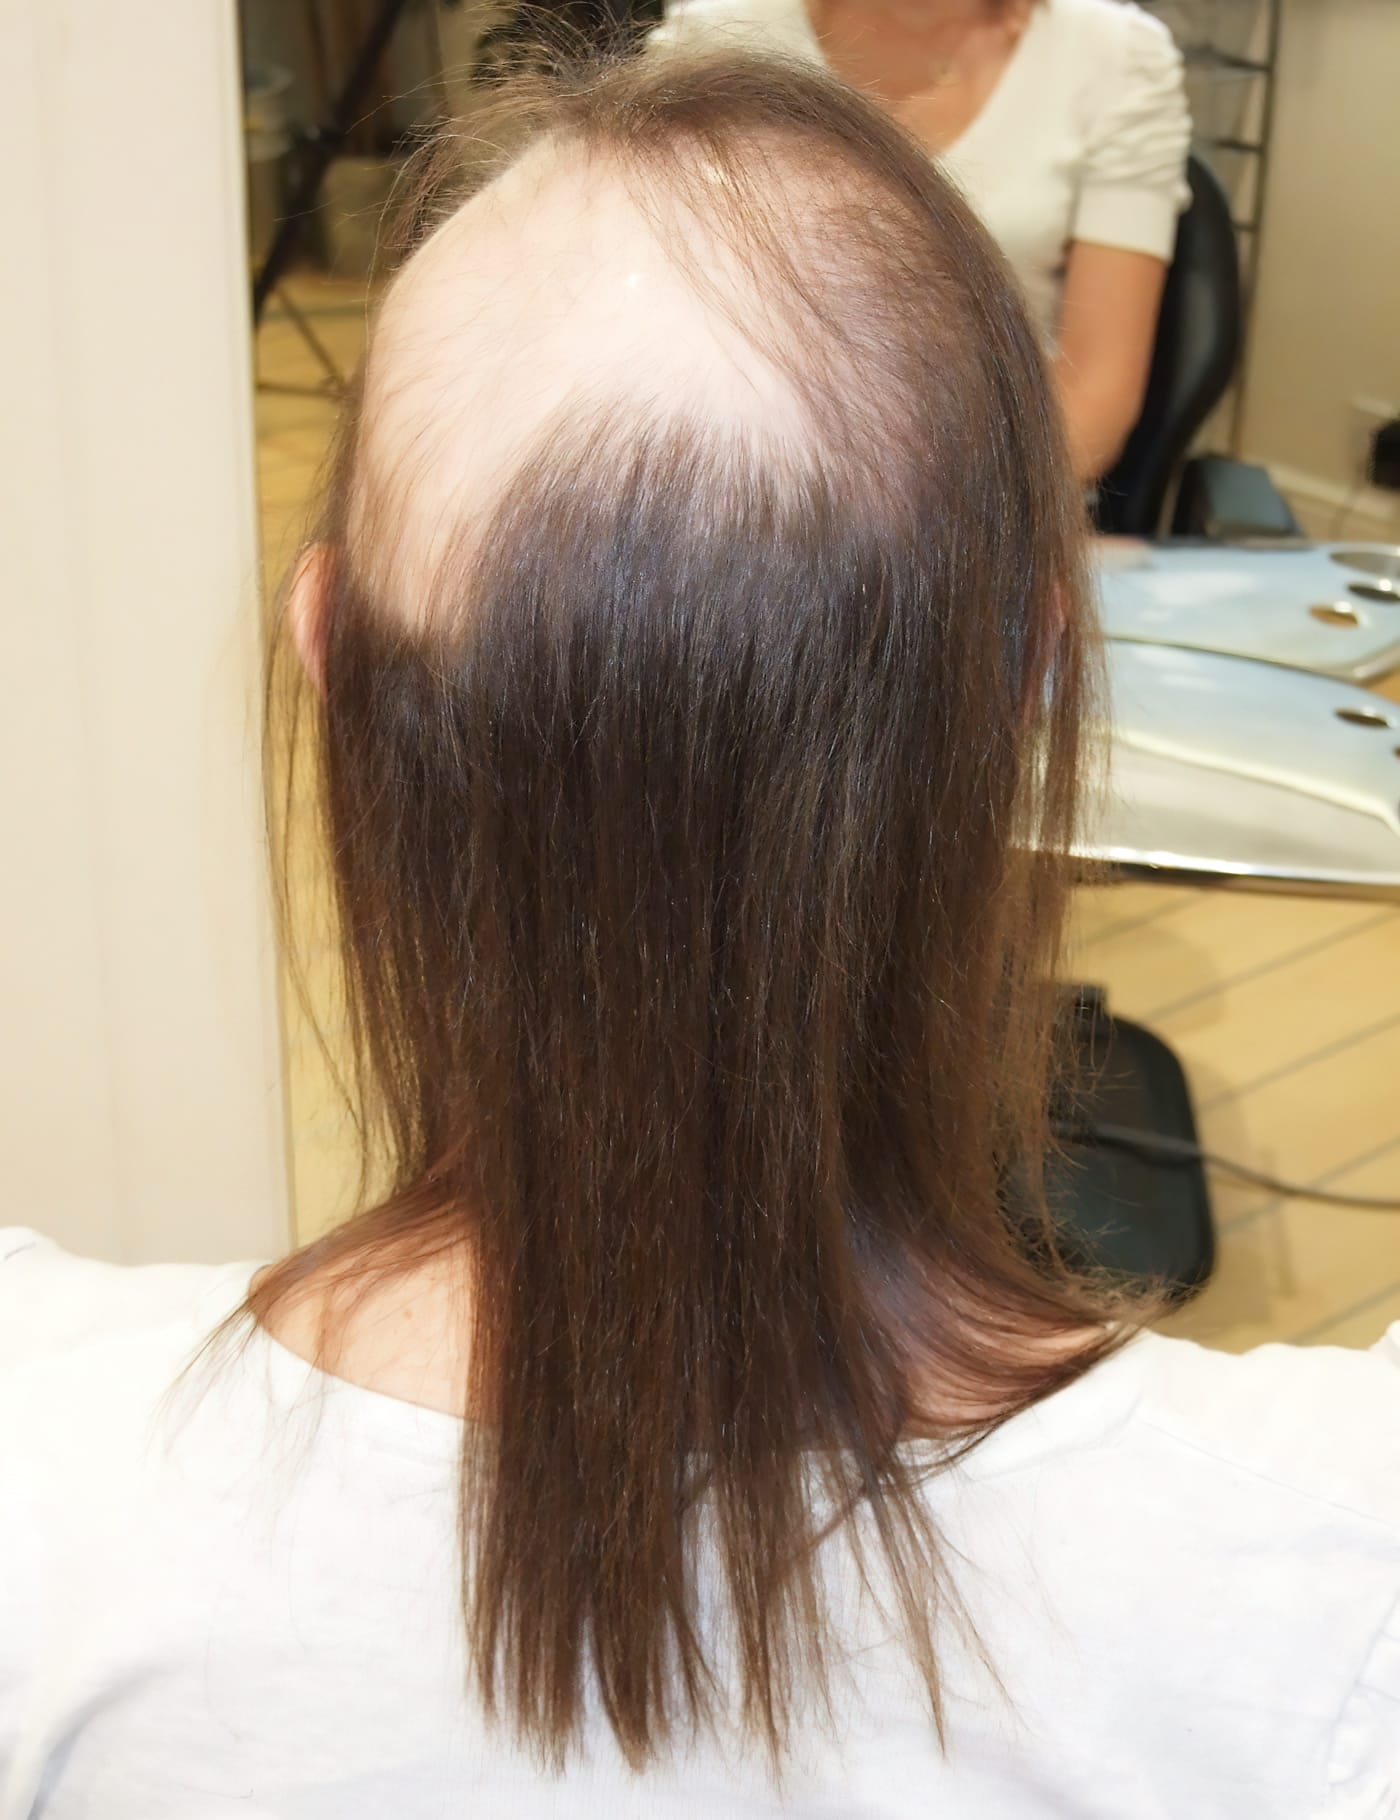 Before Picture - Radiotherapy & Surgery Hair Loss - No More Wigs